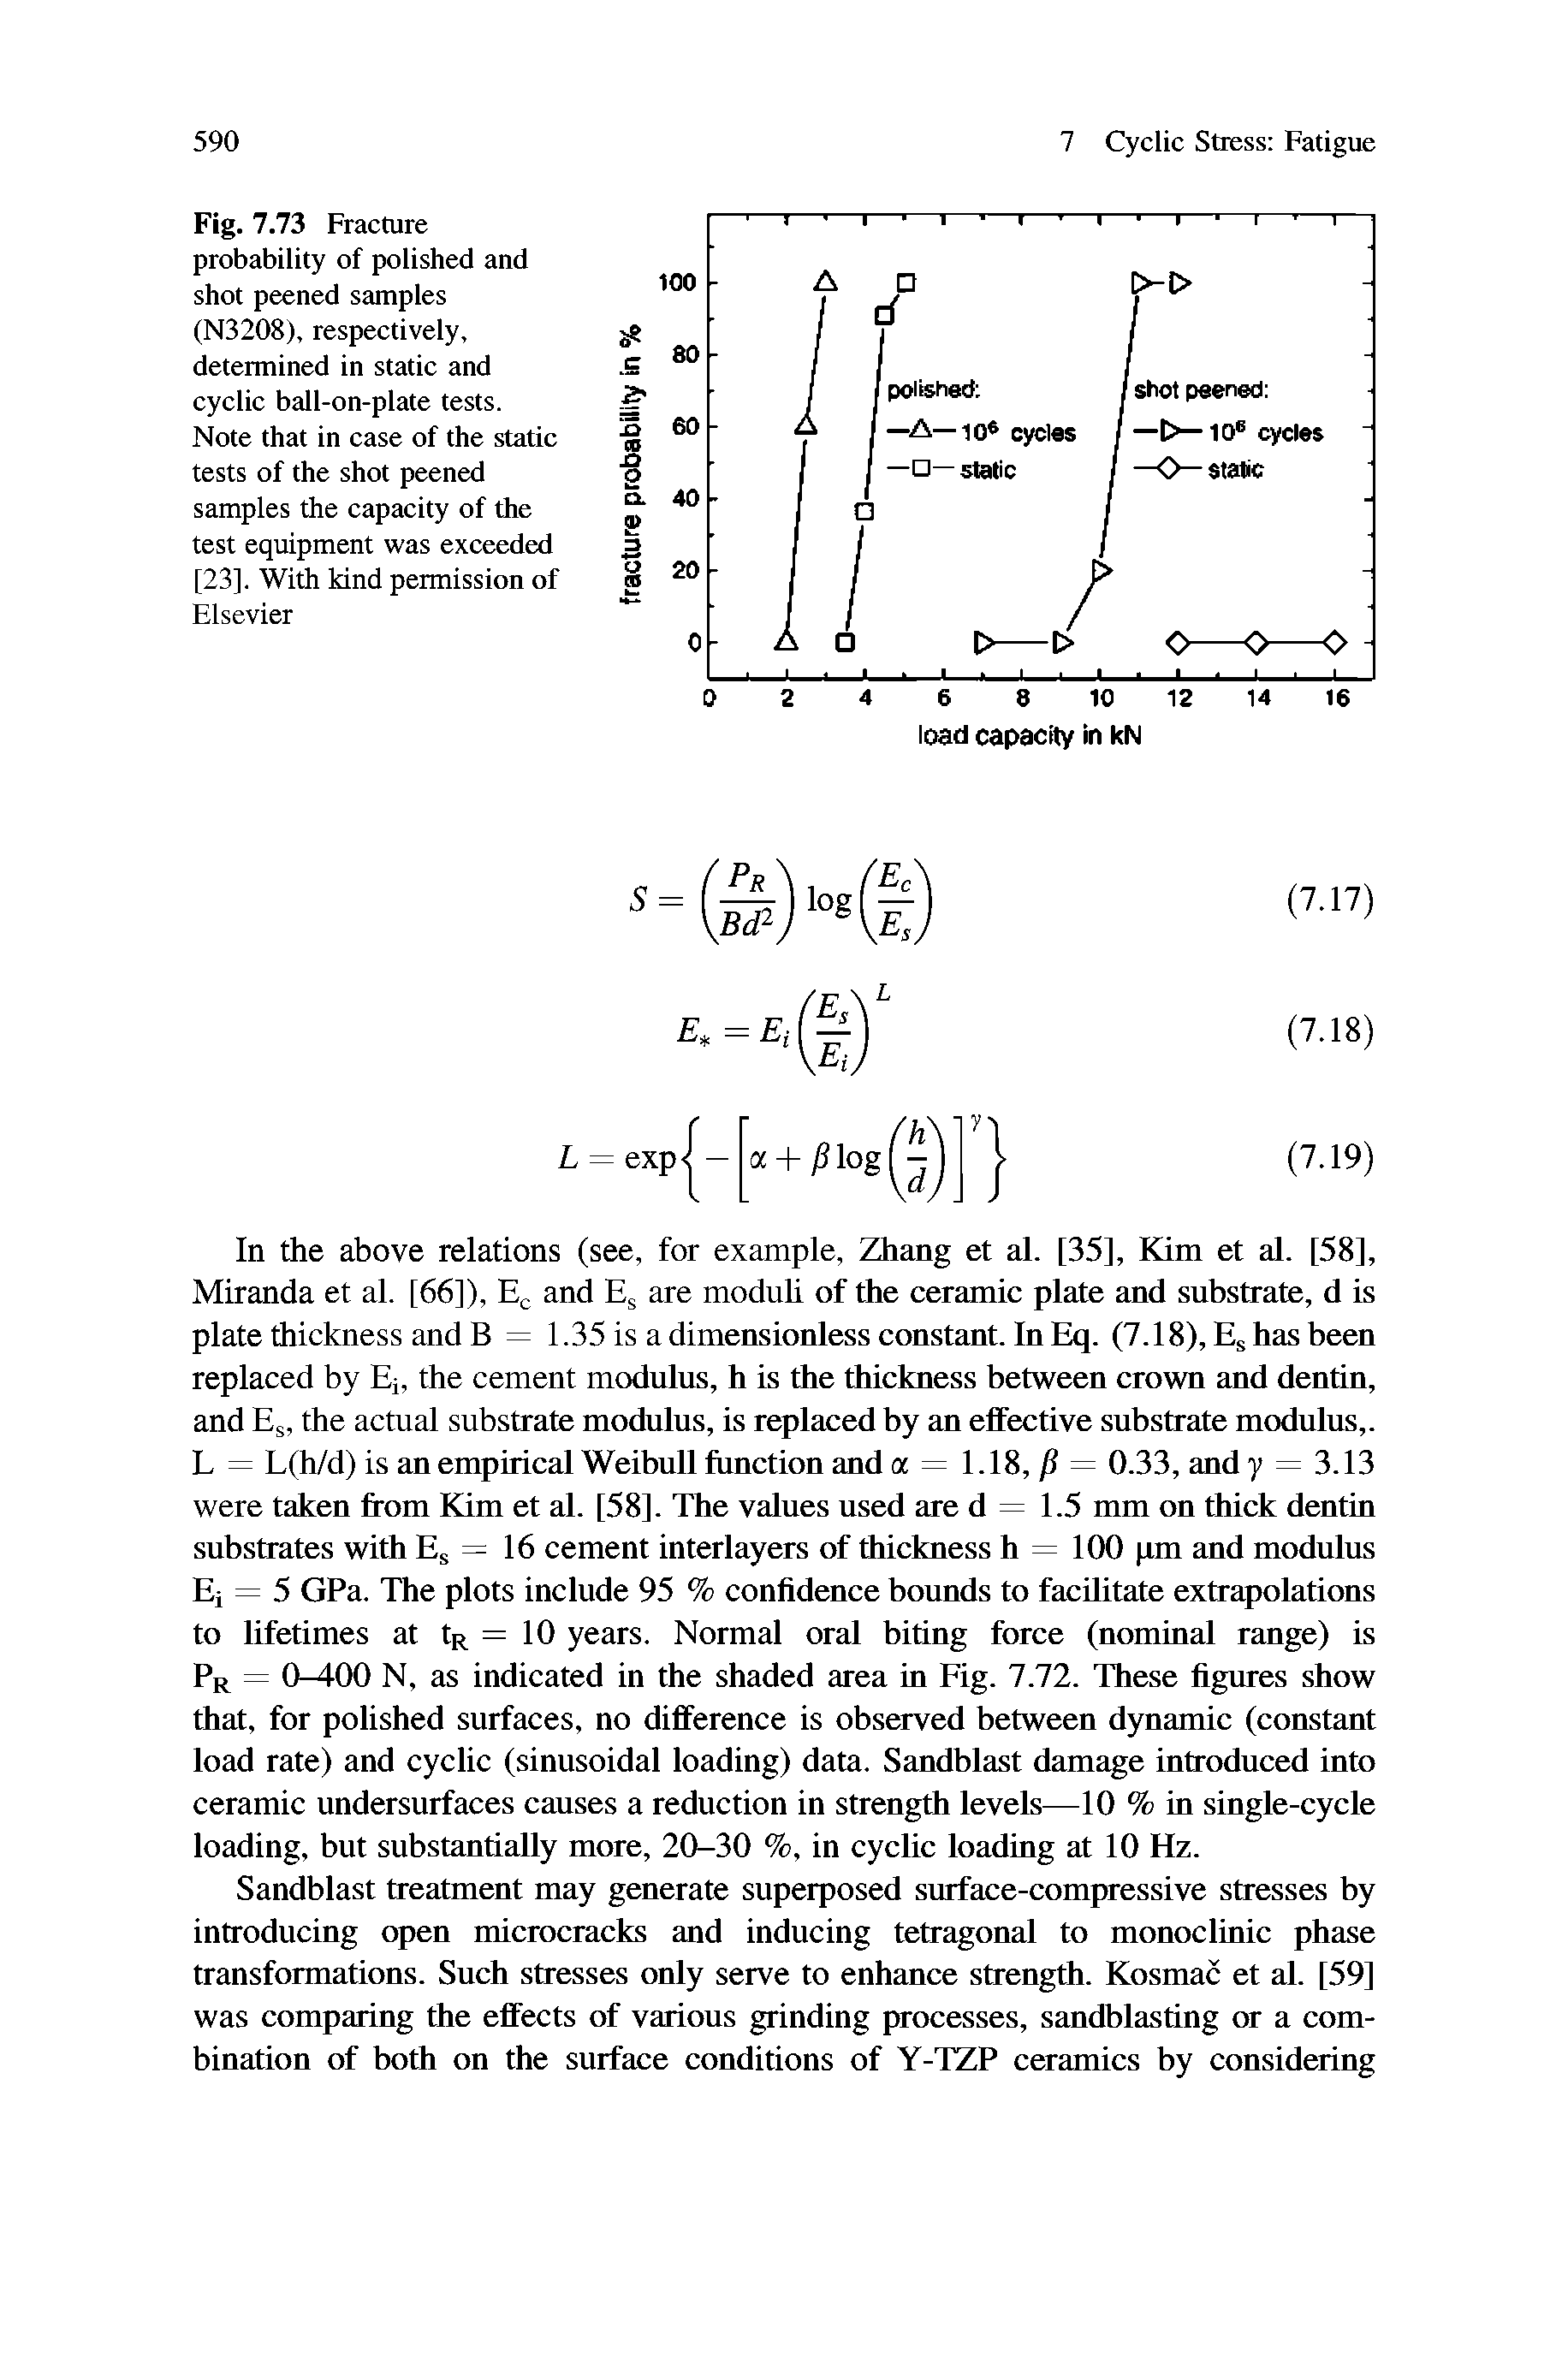 Fig. 7.73 Fracture probability of polished and shot peened samples (N3208), respectively, determined in static and cyclic ball-on-plate tests. Note that in case of the static tests of the shot peened samples the capacity of the test equipment was exceeded [23], With kind permission of Elsevier...